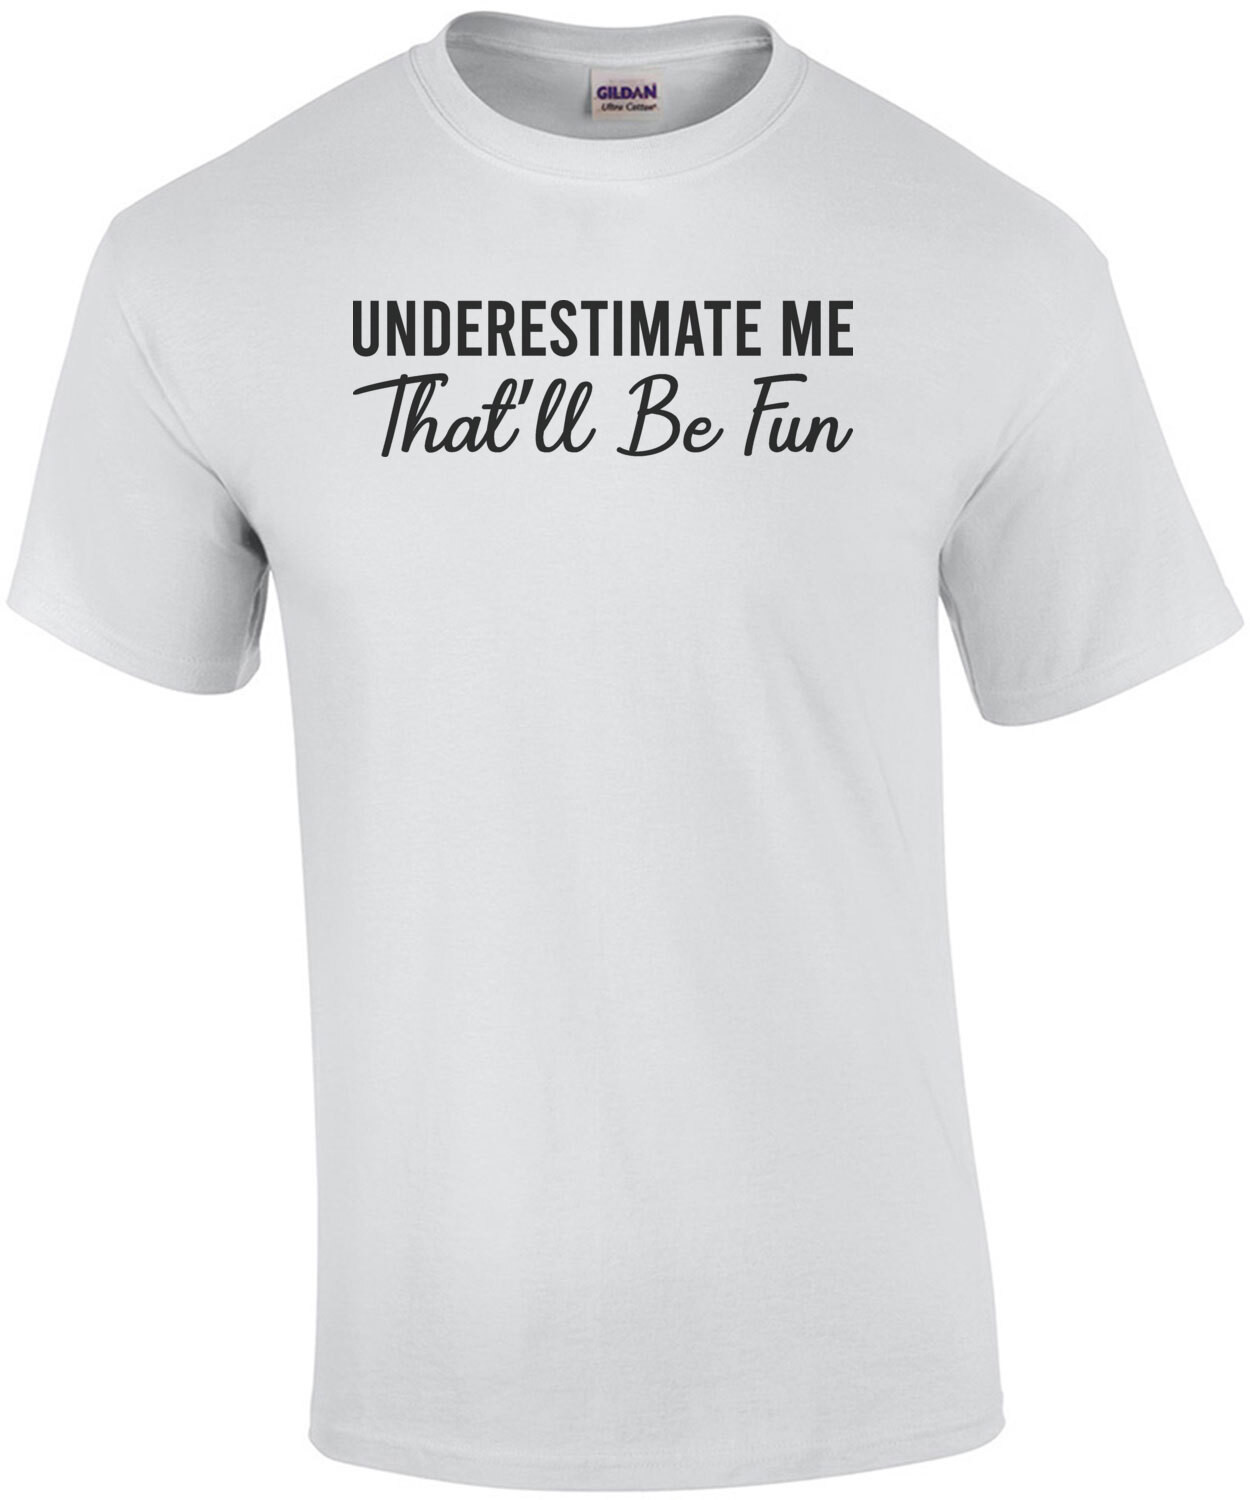 Underestimate Me - That'll Be Fun - sarcastic t-shirt